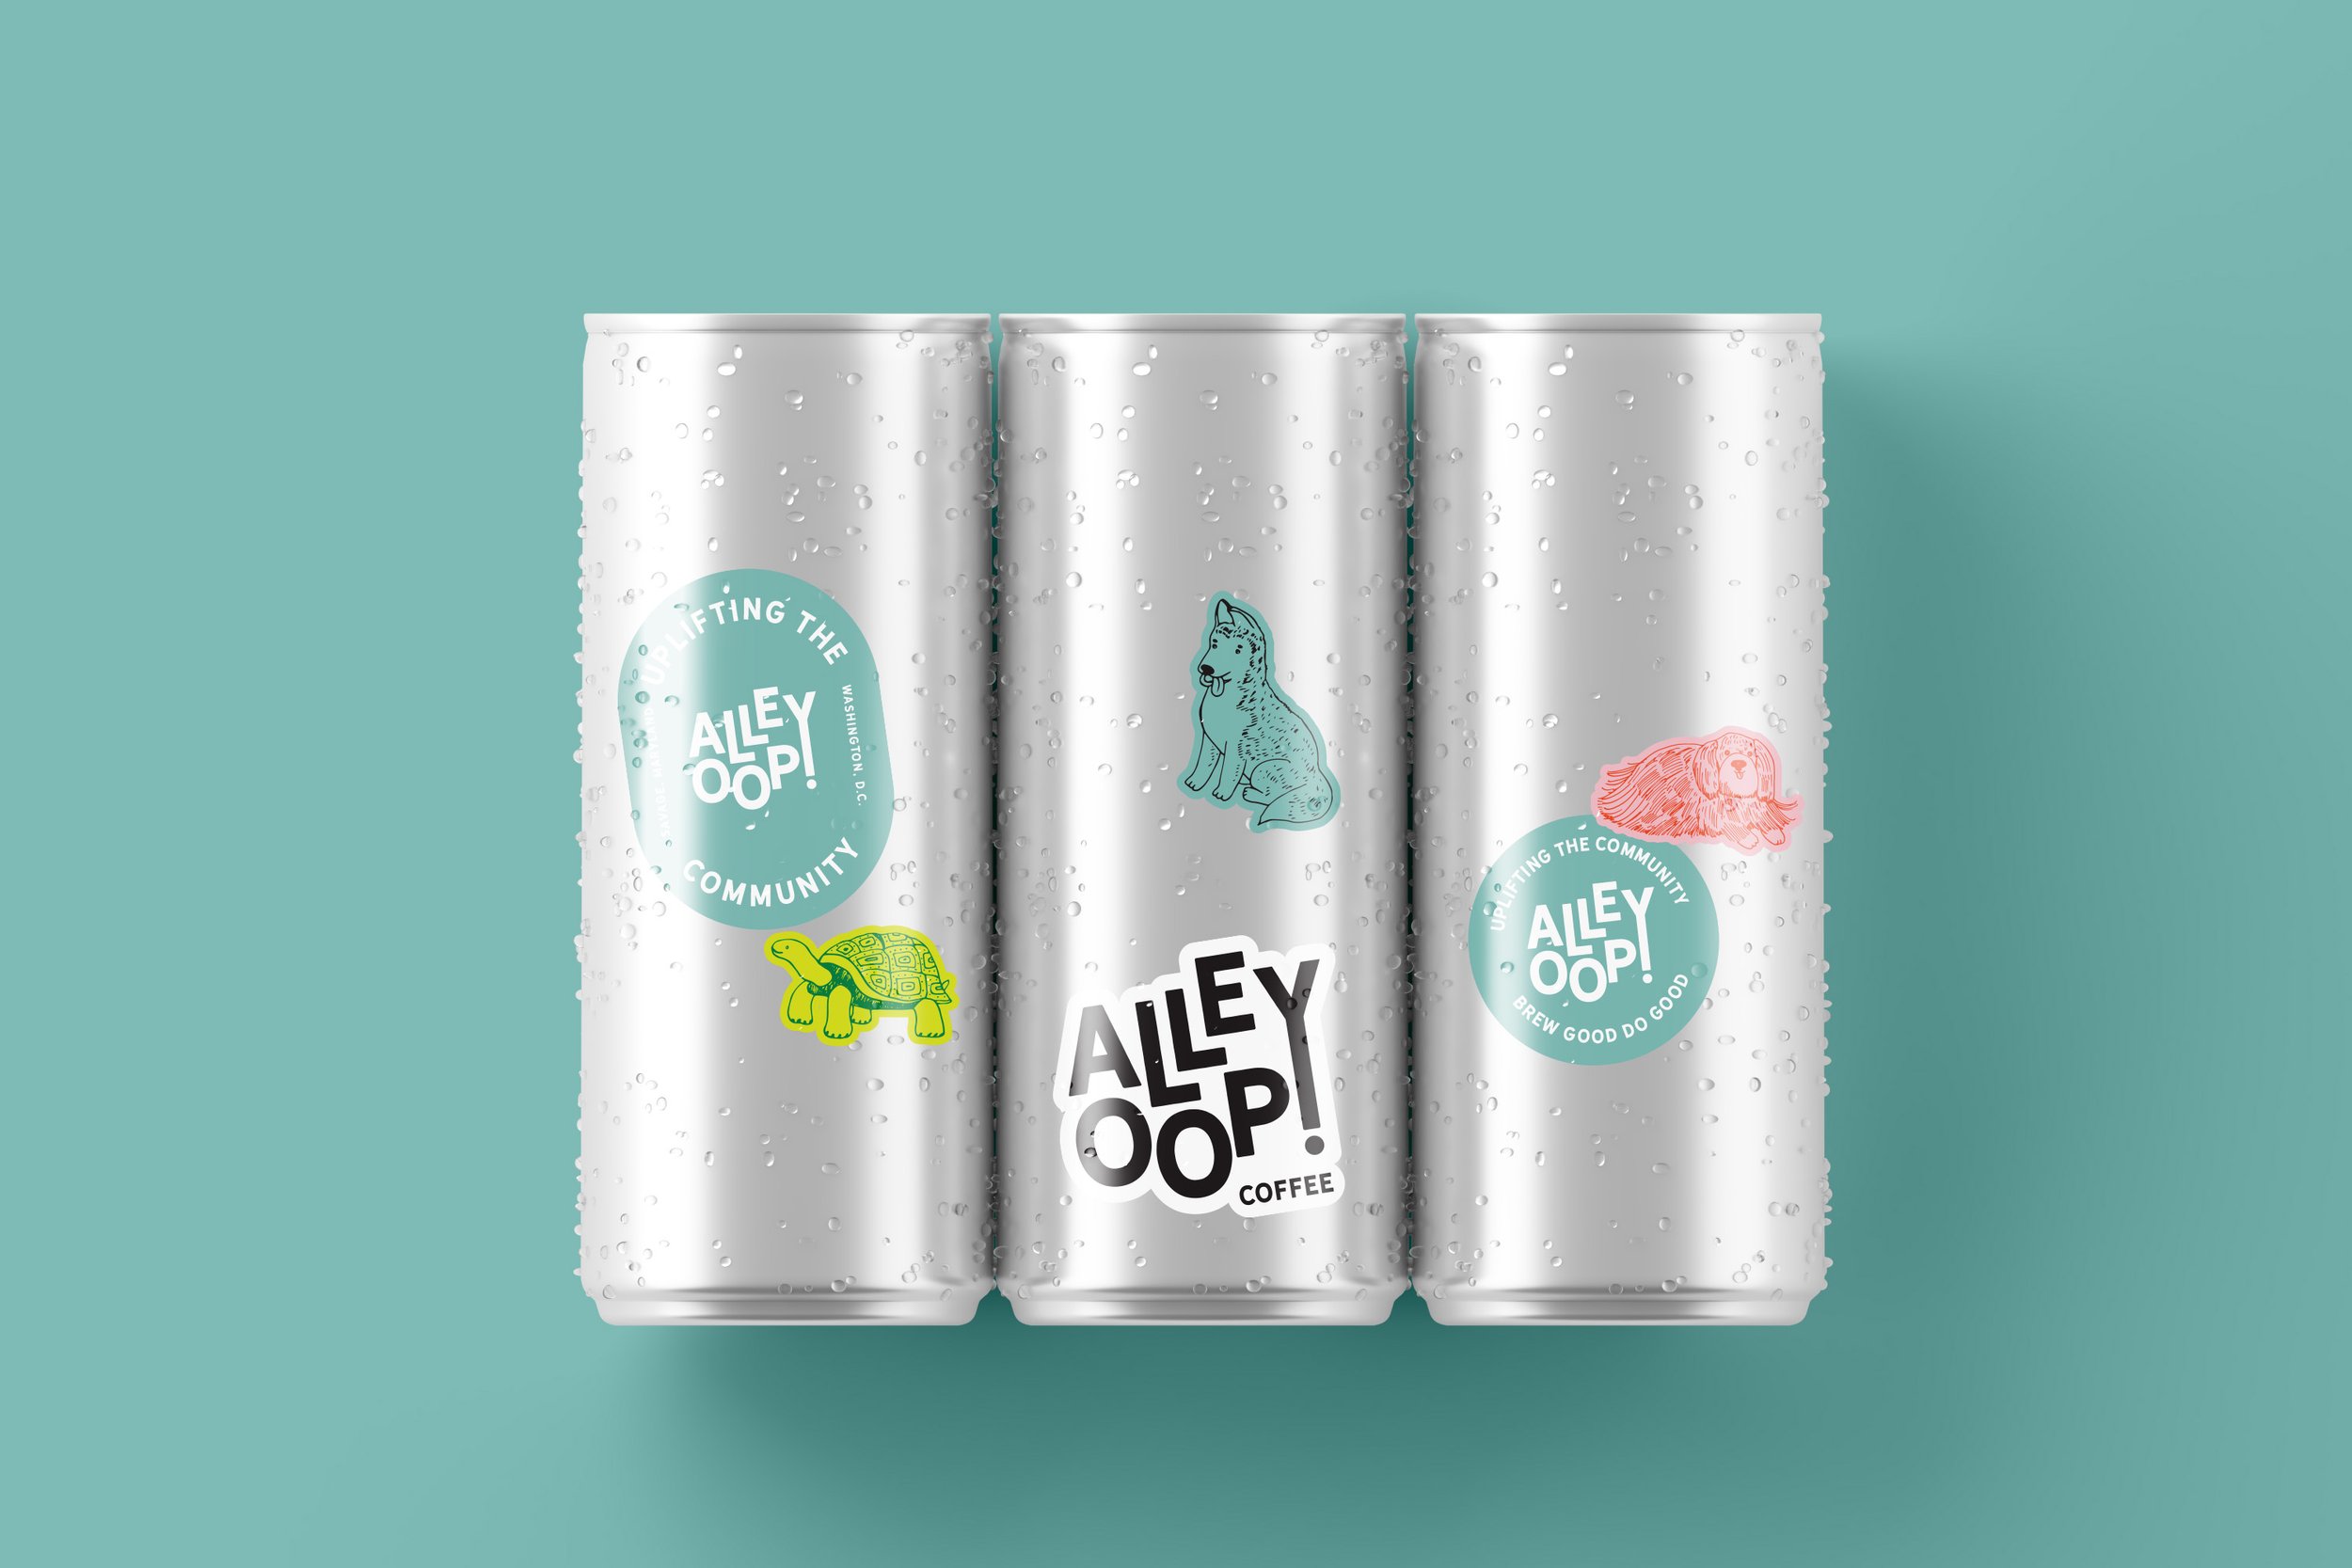 Alley-Oop-Brand-Identity-Custom-Illustration-Coffee-Cold-Brew-Can-Design-Stickers.jpg